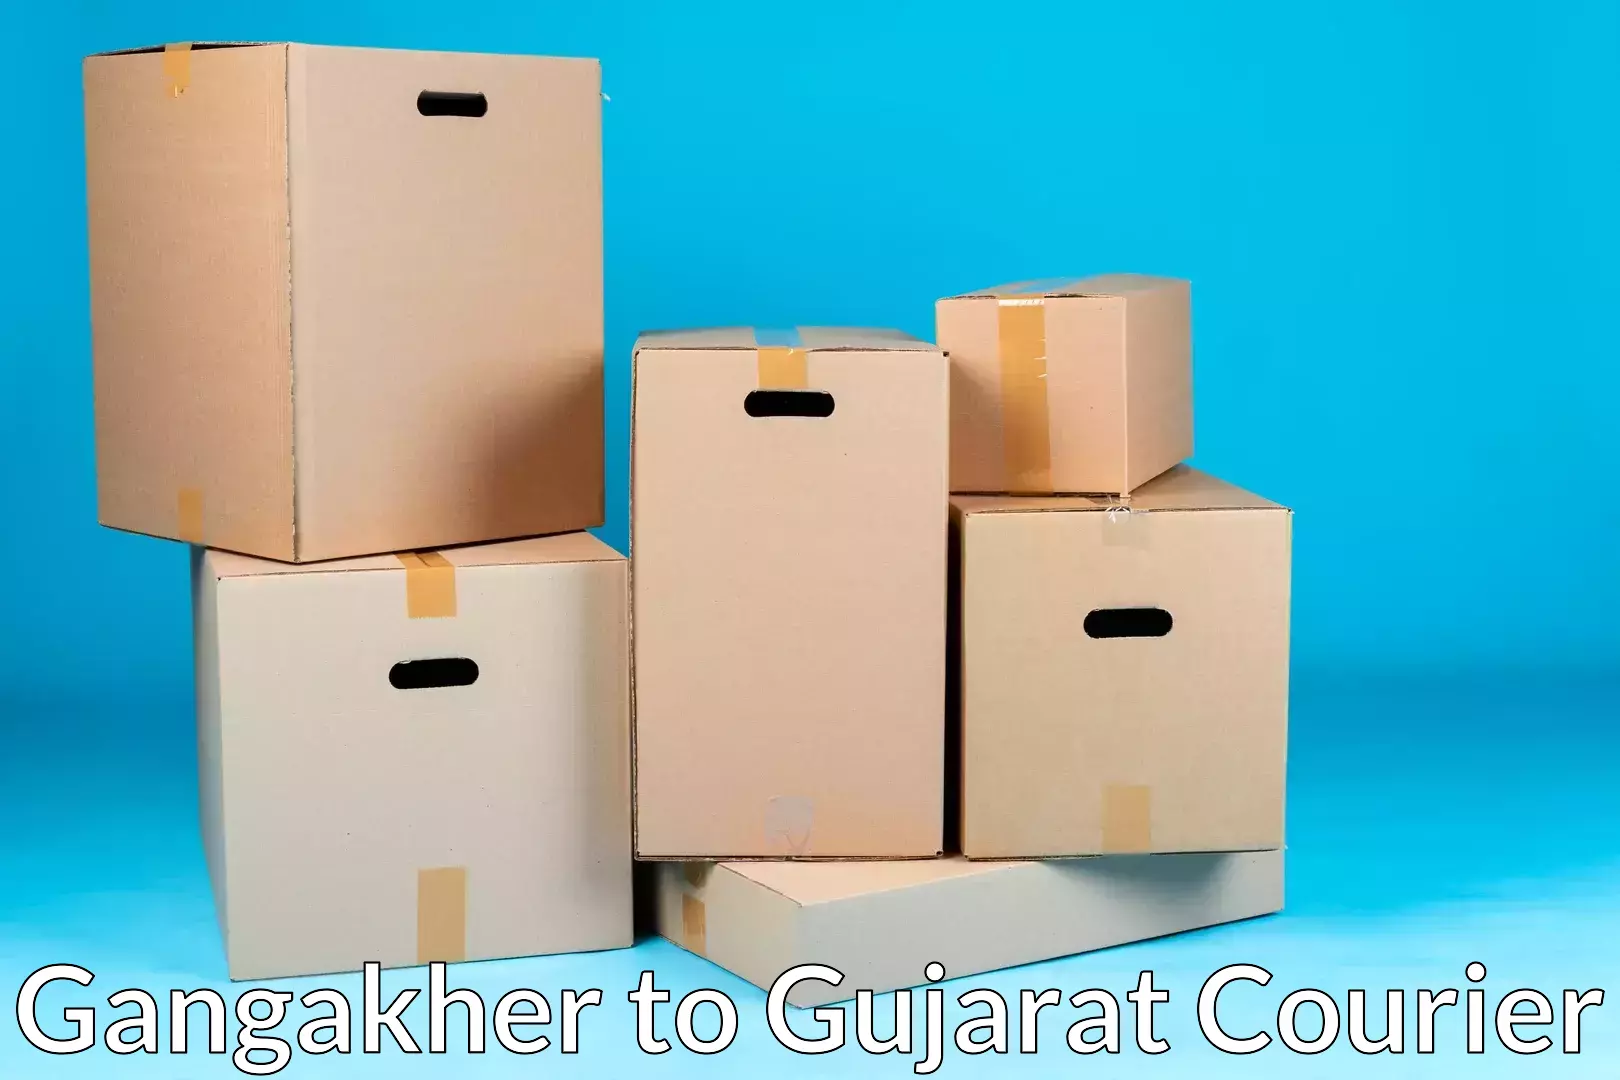 Full-service relocation Gangakher to Kachchh